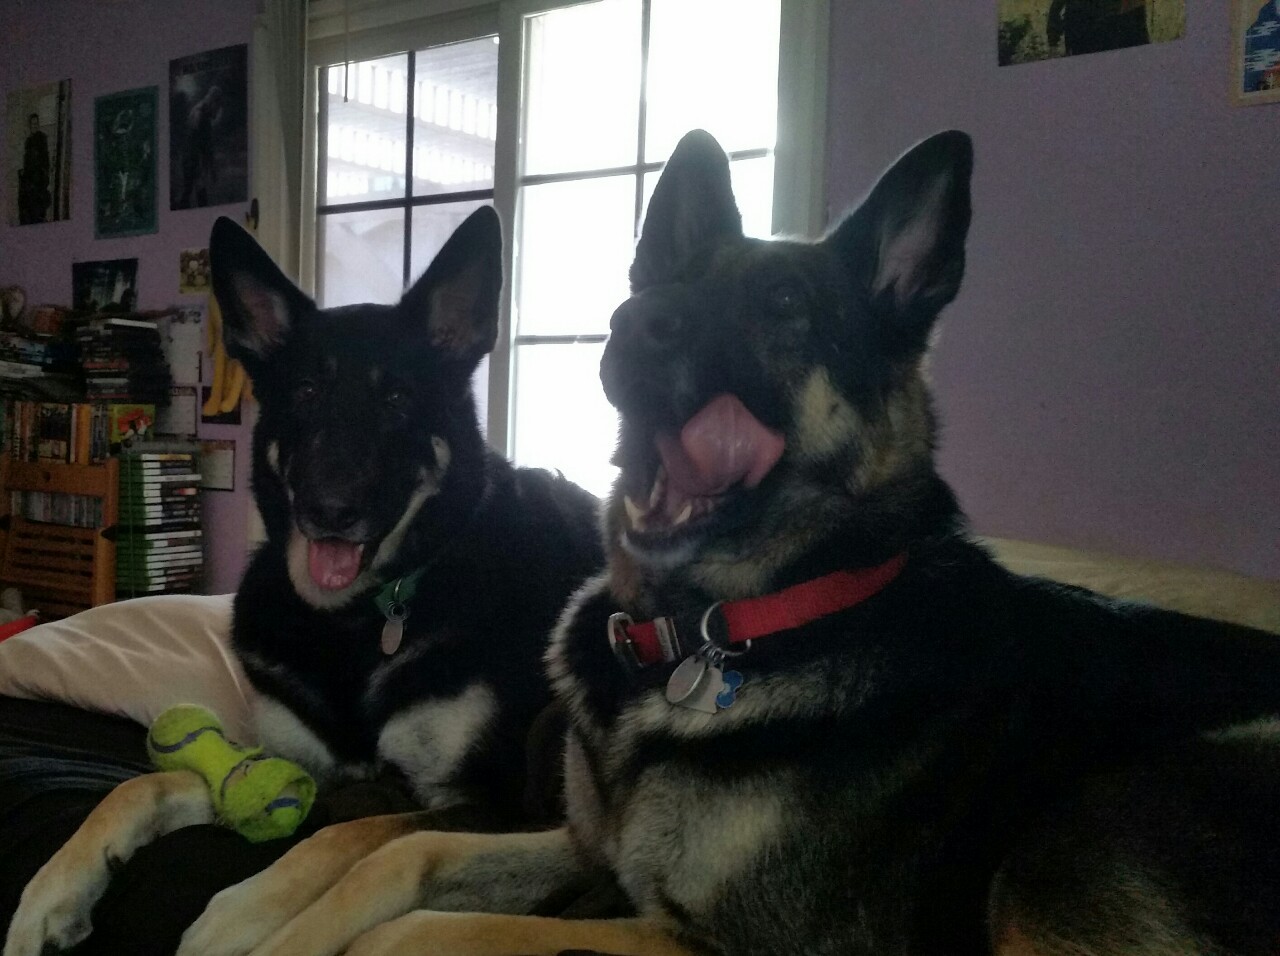 I was trying to take a picture of my dogs because they were sitting side by side